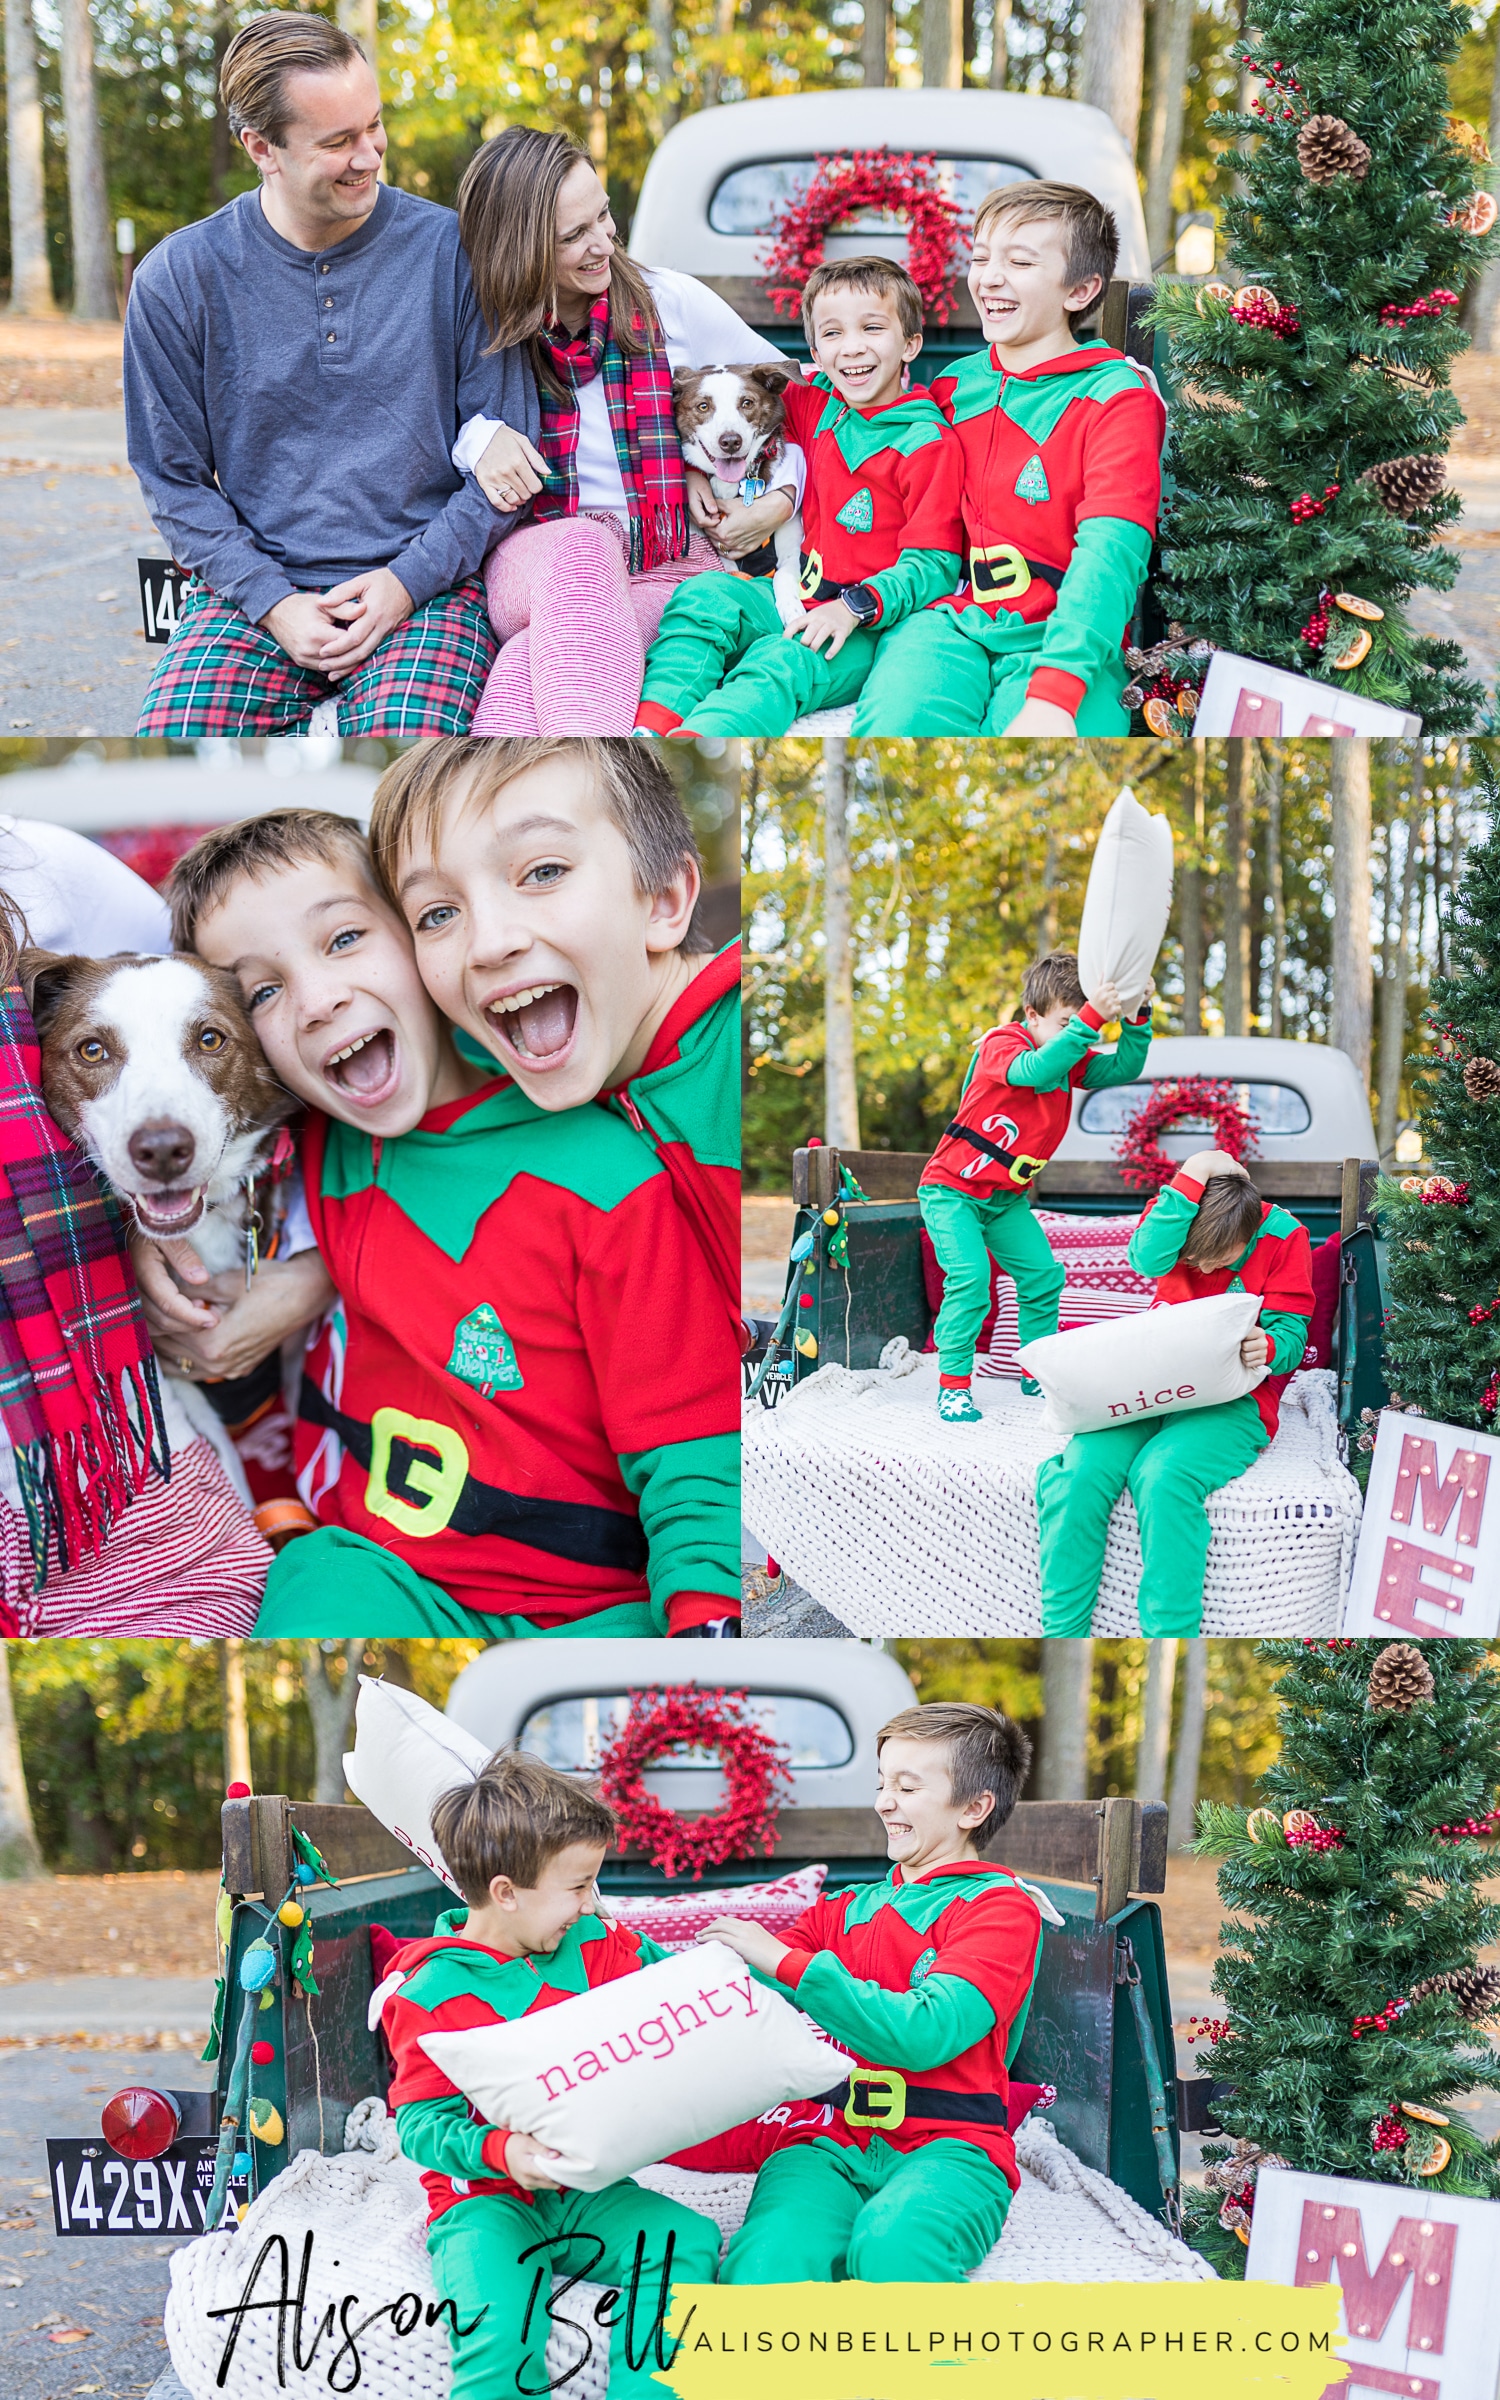 Virginia Beach fall minis session with old Christmas Truck